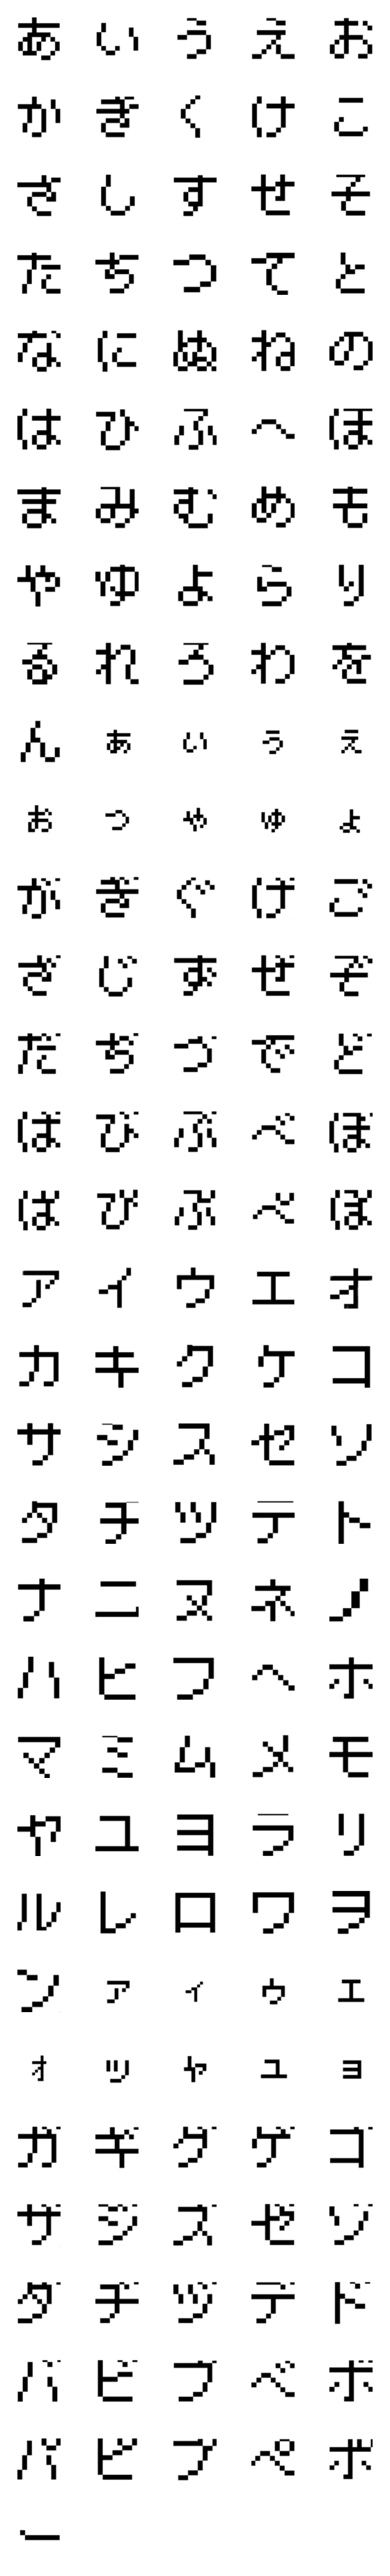 [LINE絵文字]ゲーム絵文字！の画像一覧